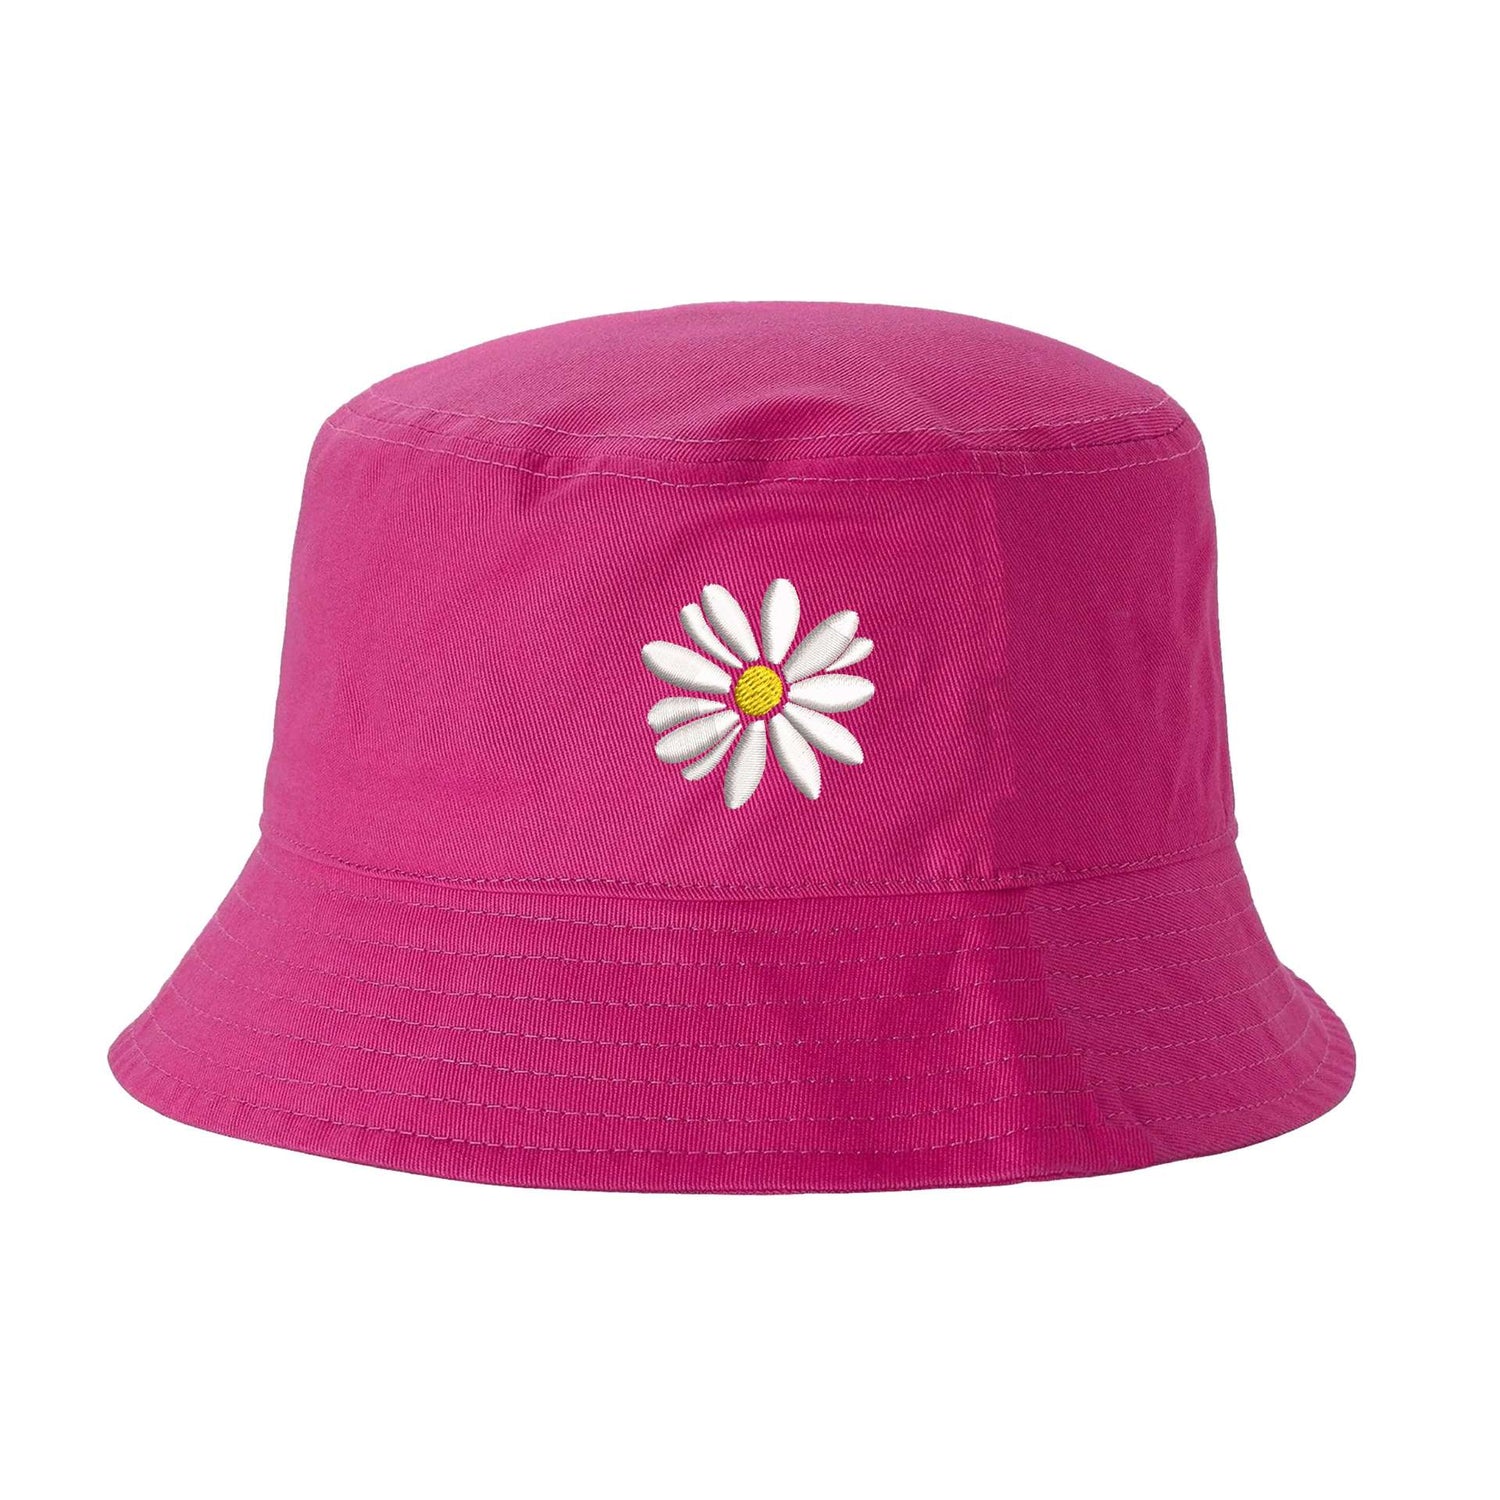 Hot Pink Bucket hat embroidered with a daisy flower - DSY Lifestyle